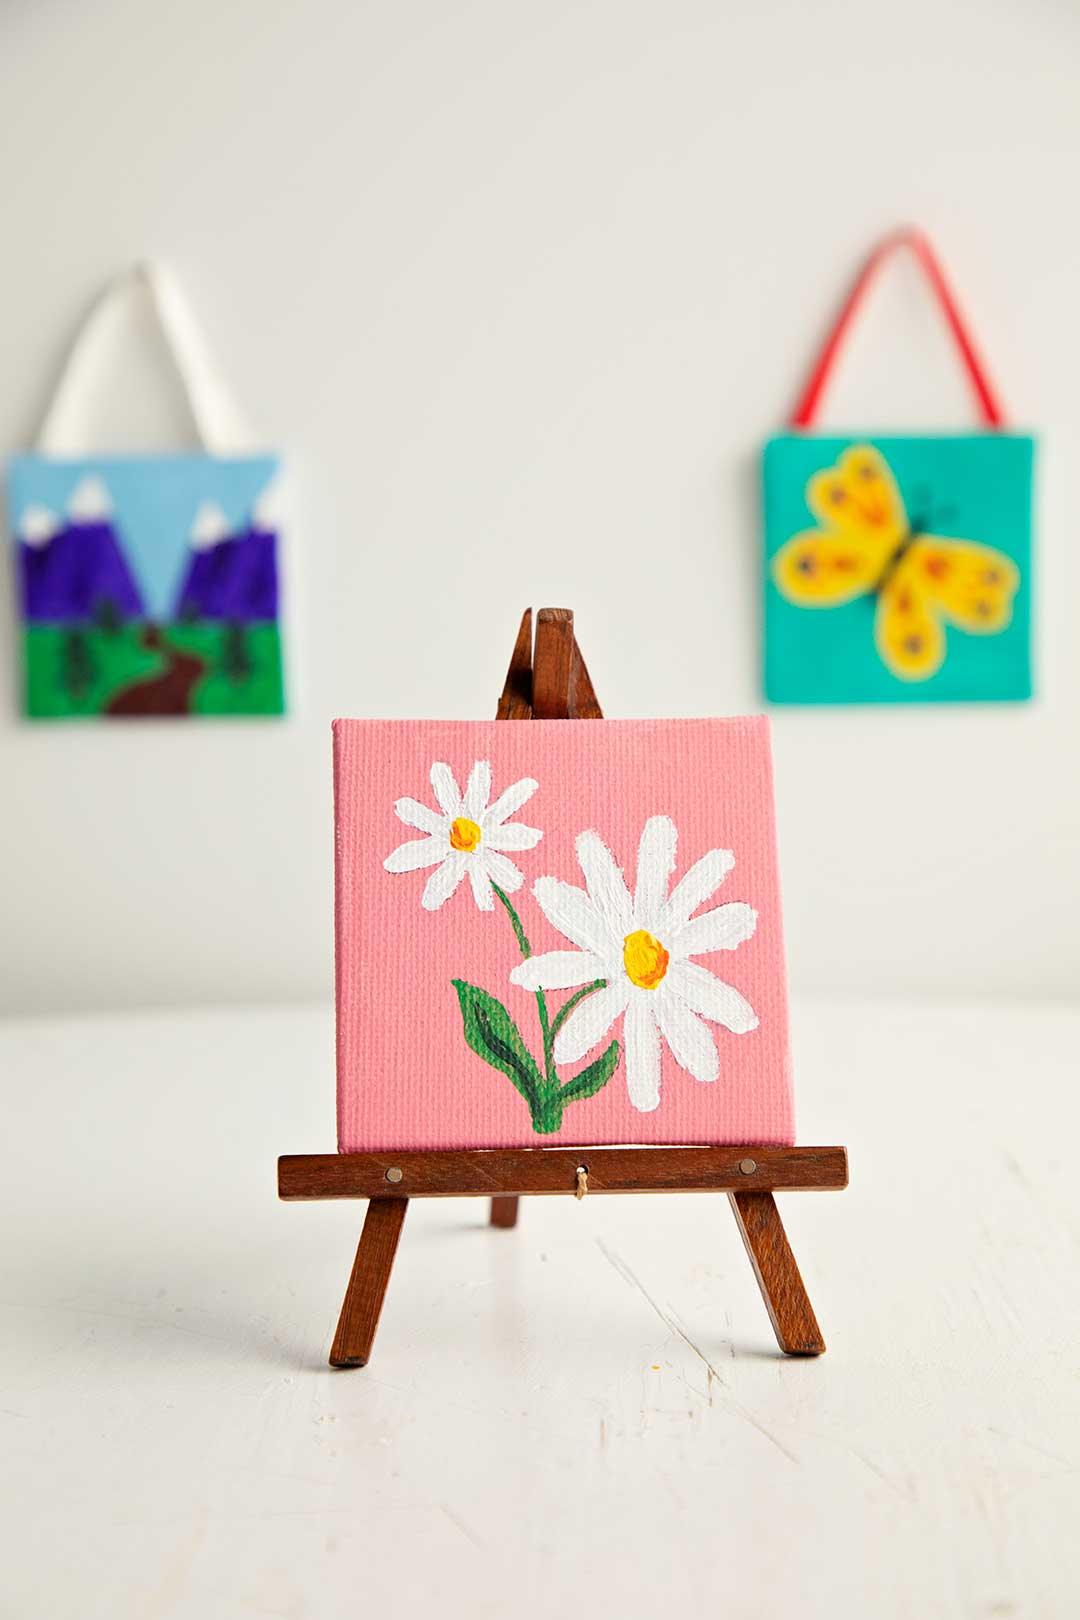 2 Paintings for beginners, 2 mini canvas paintings